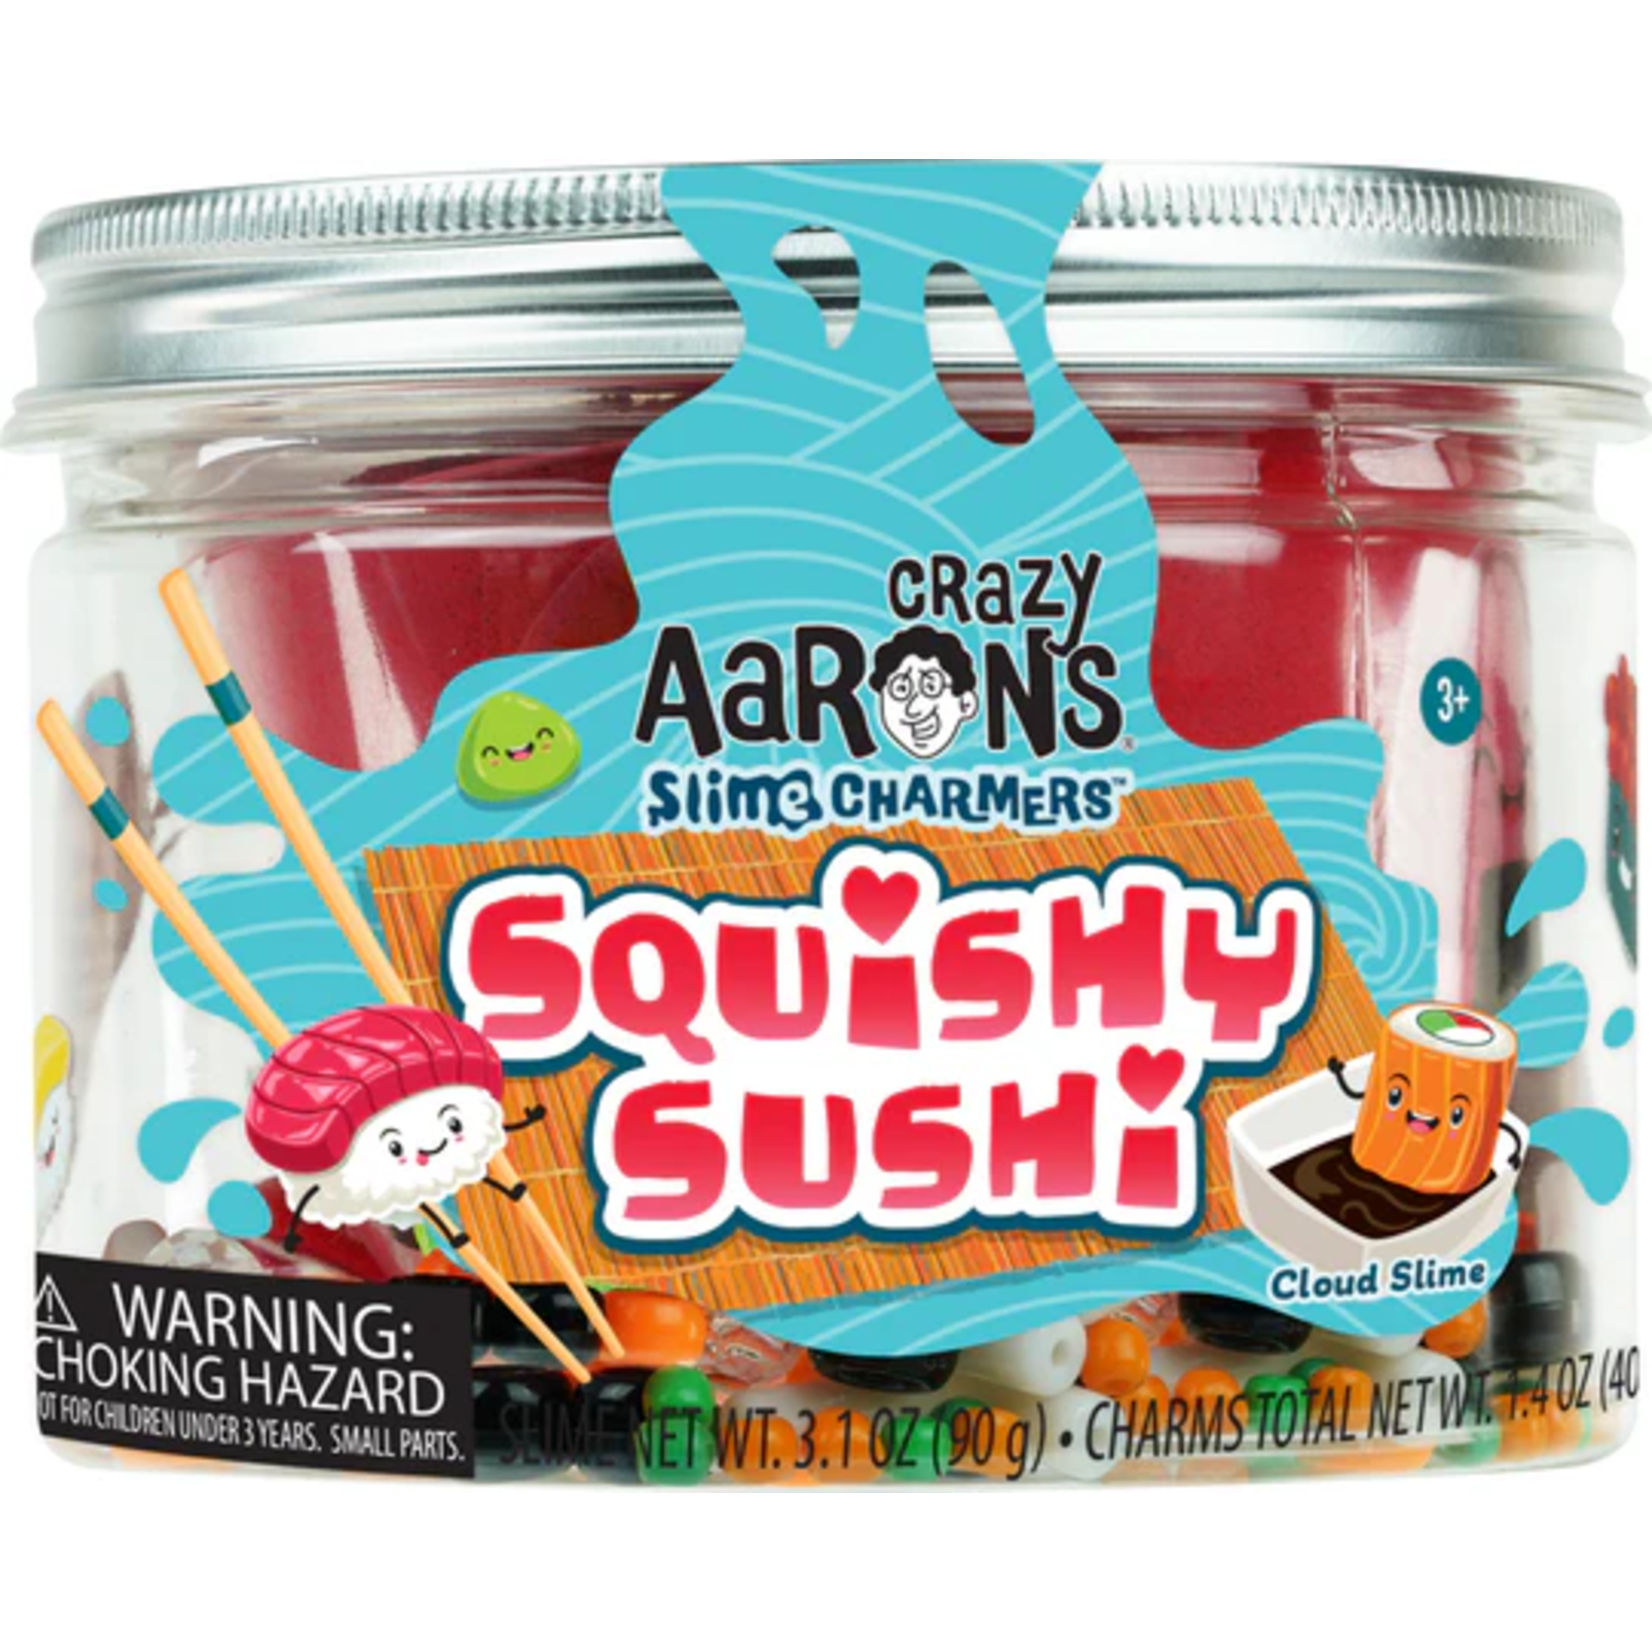 Crazy Aaron’s Slime Charmers - Squishy Sushi